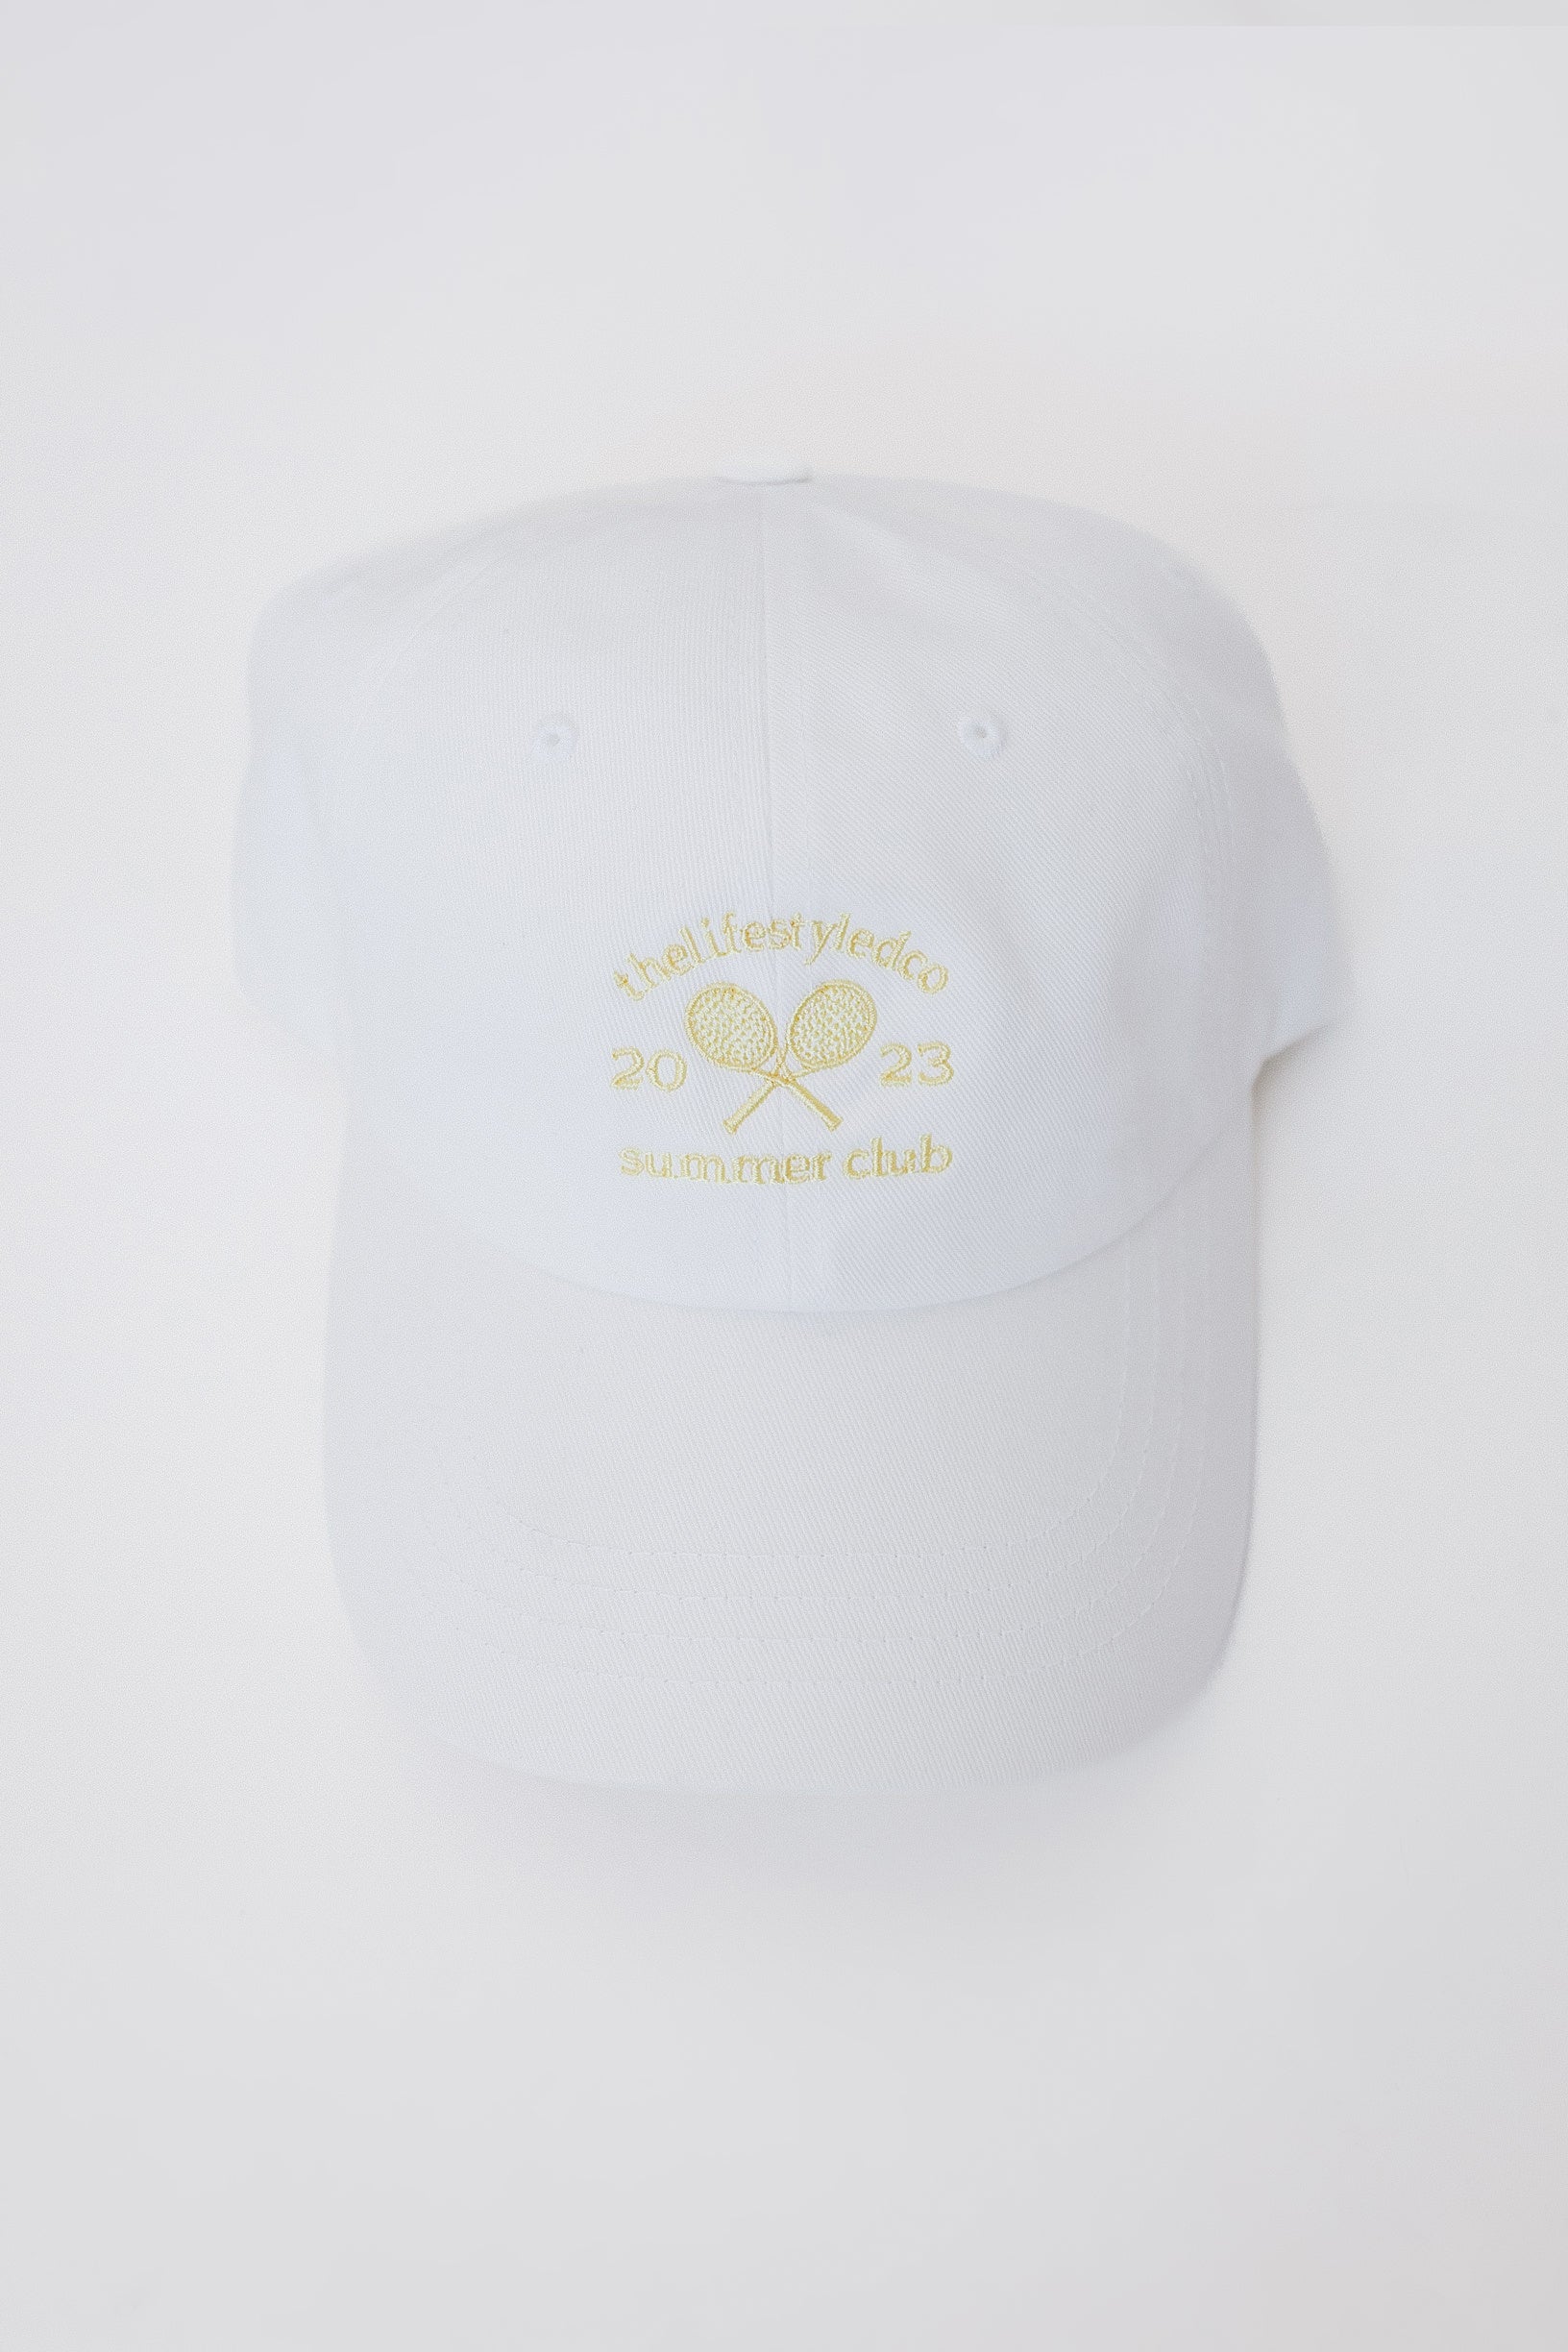 LCO Summer Club Dad Hat - 10 Colors